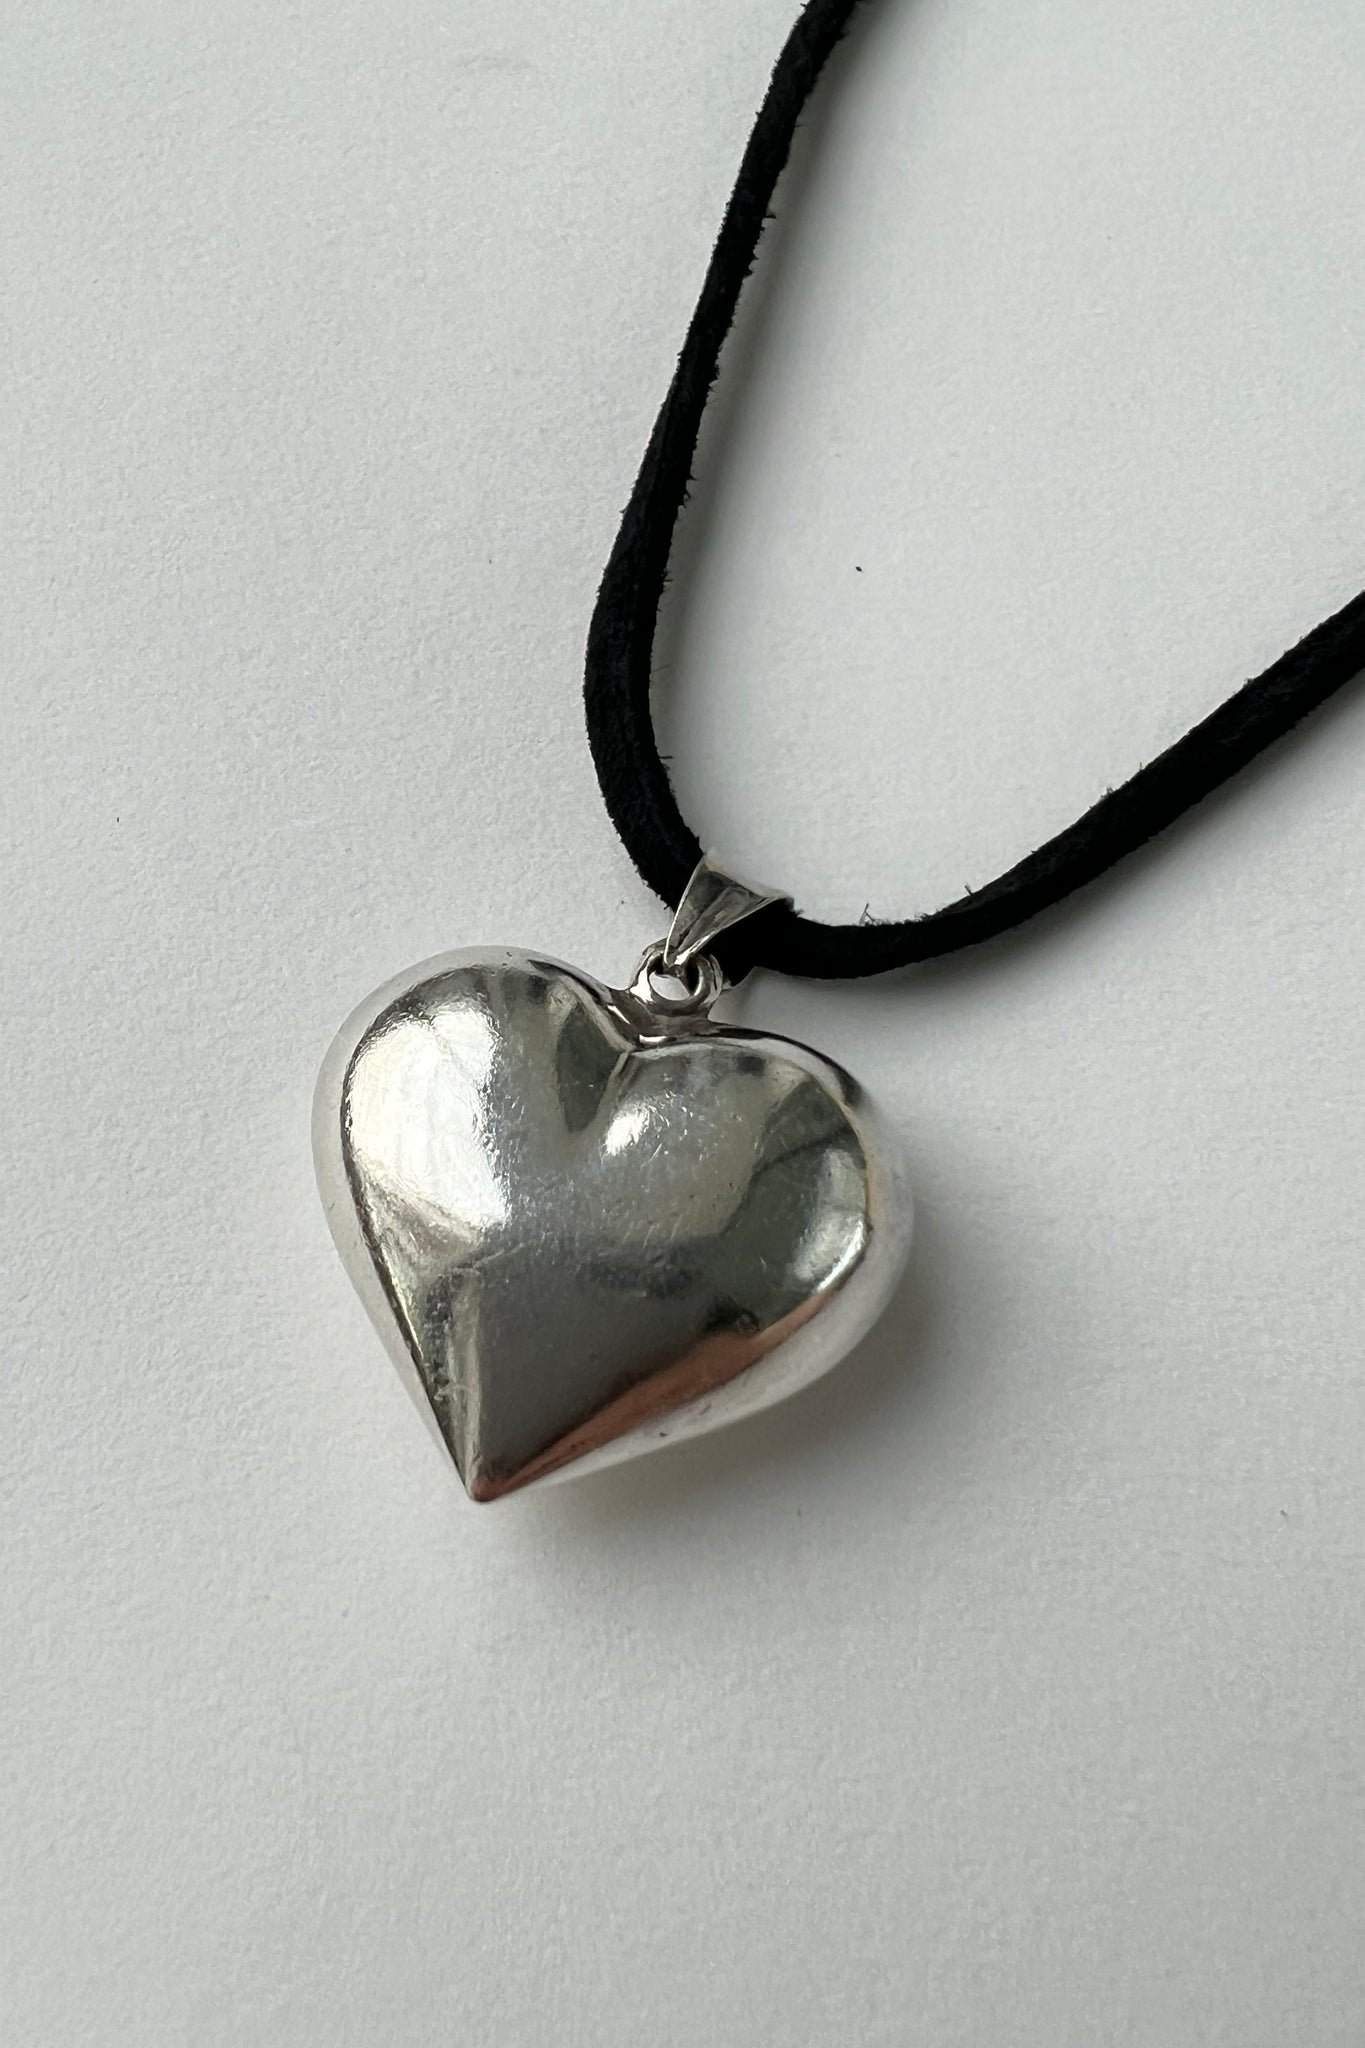 Silver Puffy Heart Leather Tie Choker